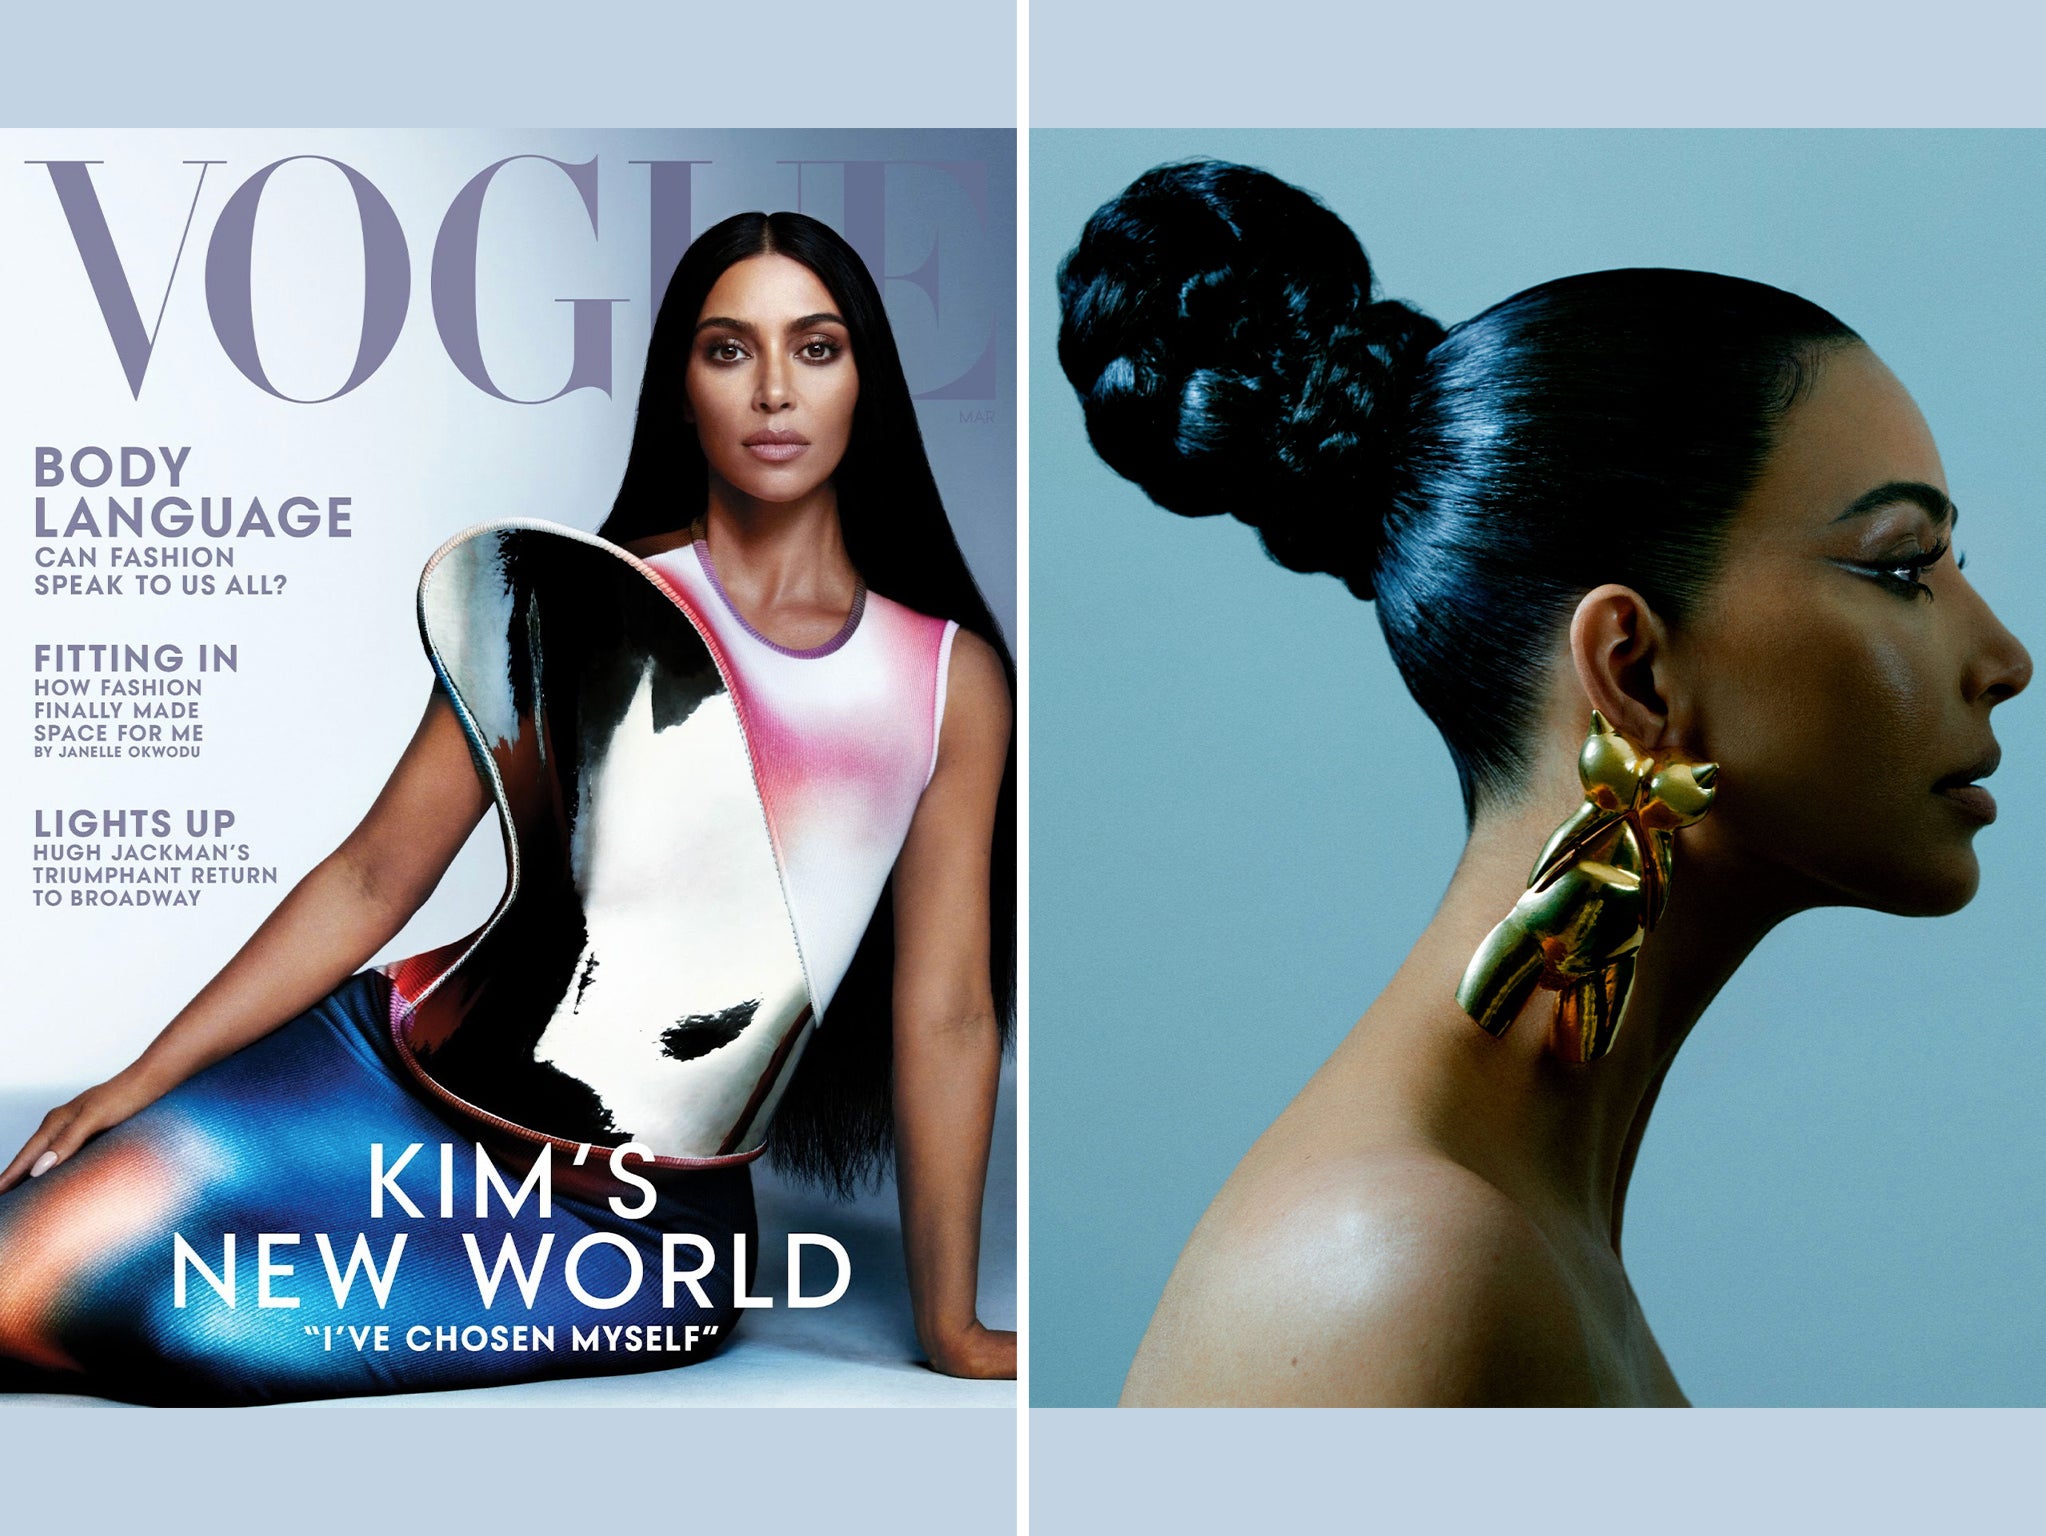 Kim Kardashian accused of cultural appropriation over Vogue shoot | The ...